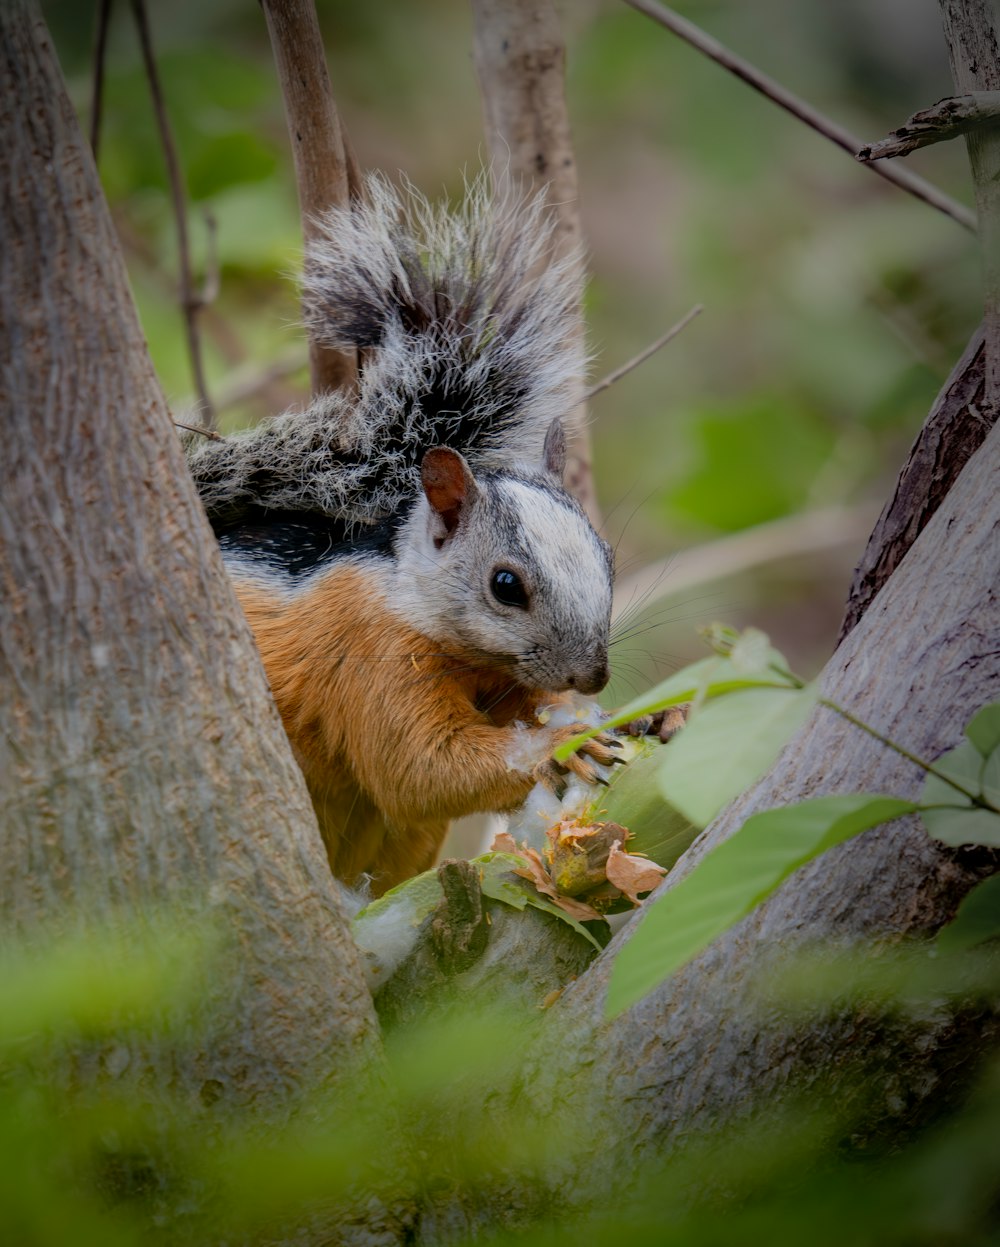 a squirrel eating a nut in a tree